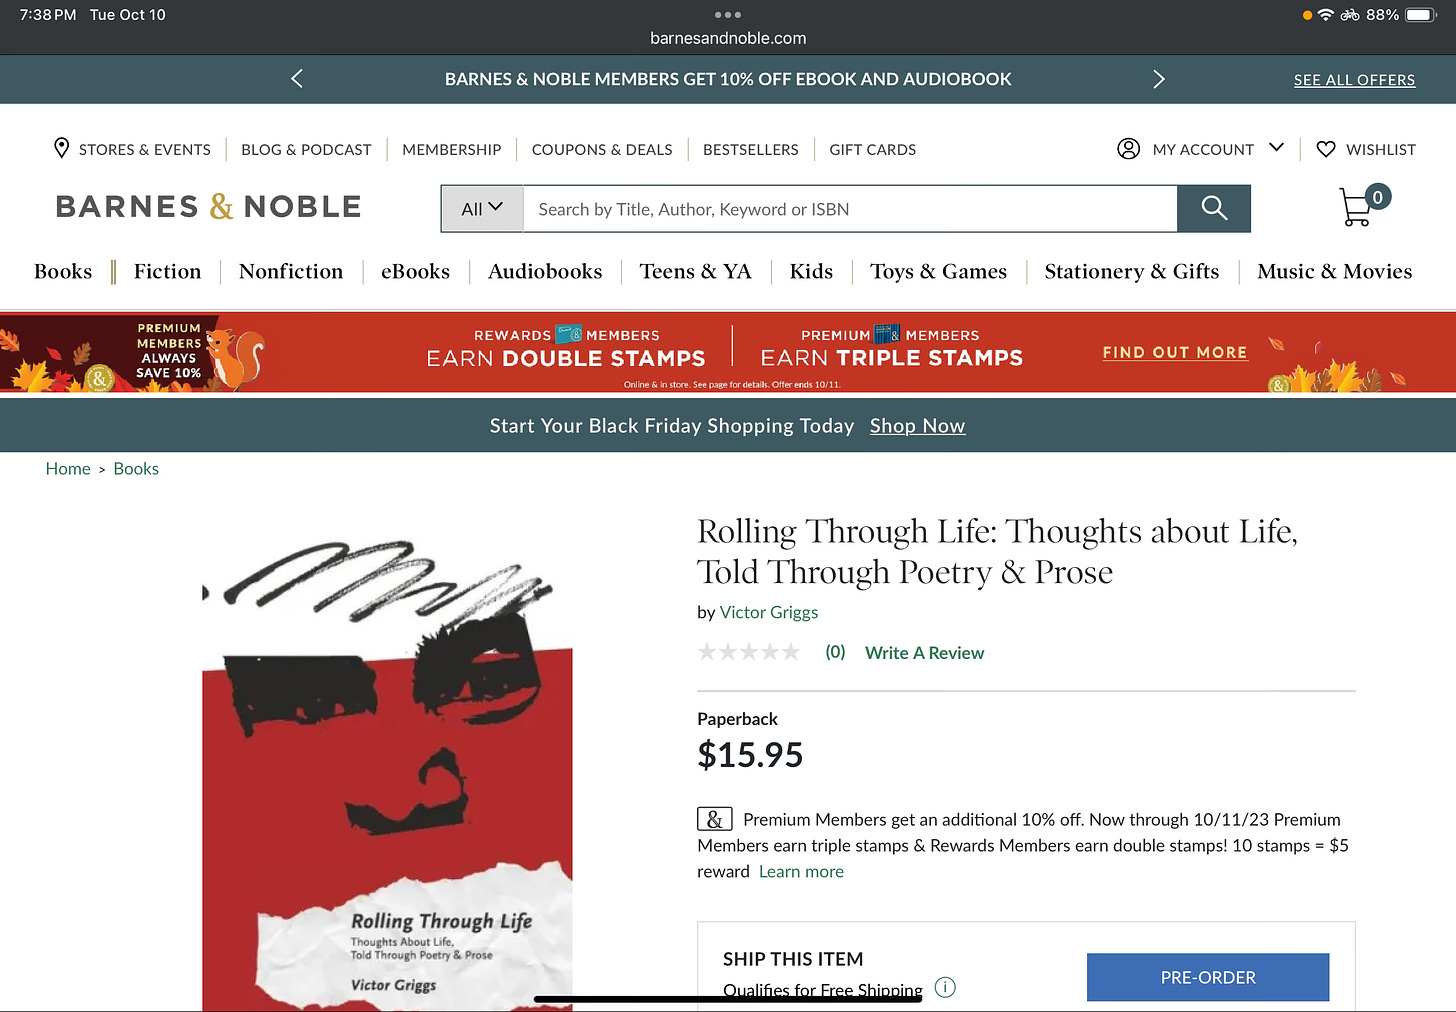 Screenshot of the book, Rolling Through Life, on the Barnes & Noble website.